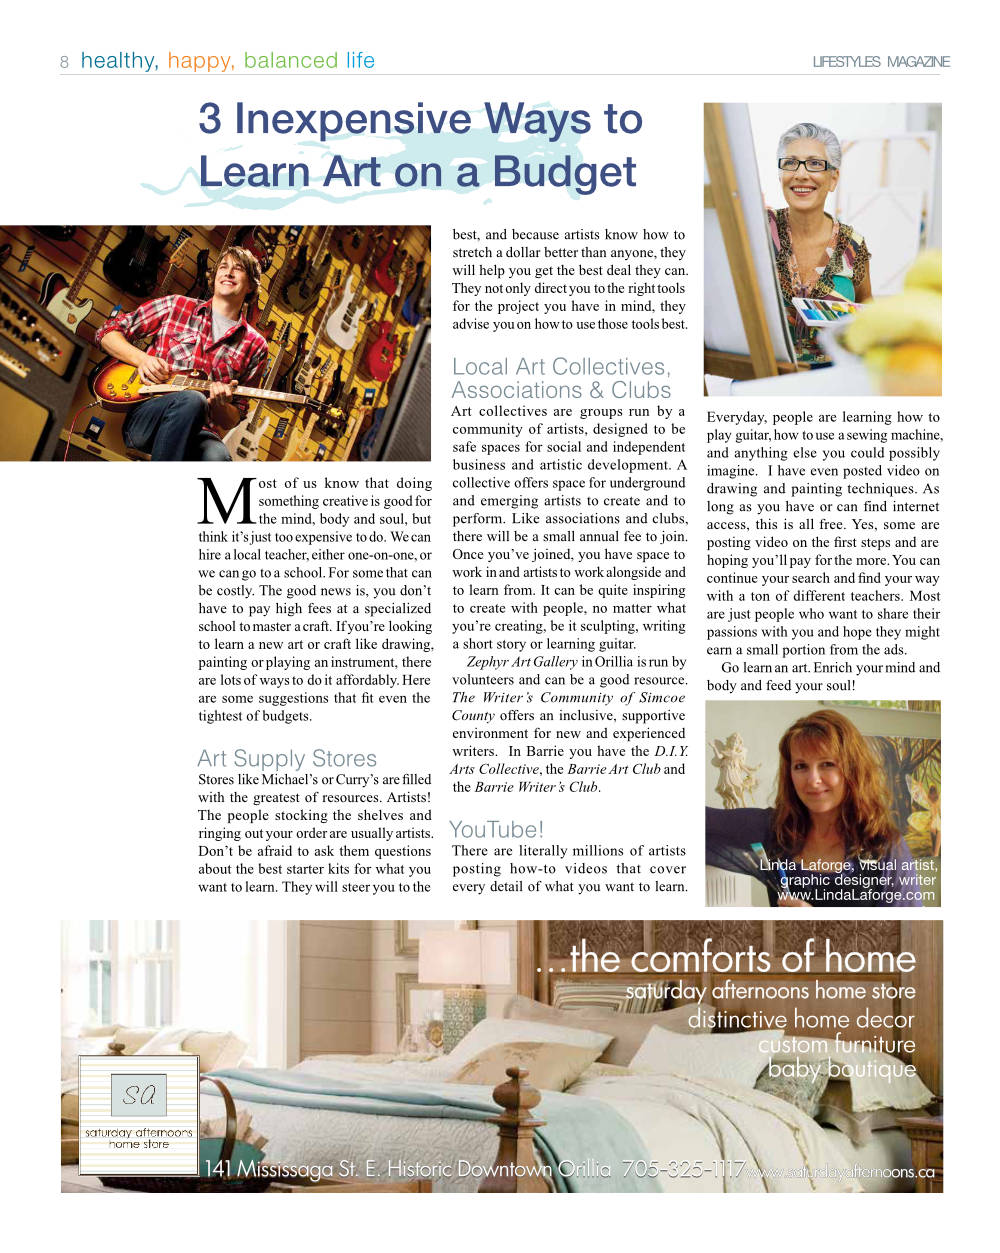 artist Linda Laforge writes about art on a budget in Lifestyles Magazine in Ontario Canada